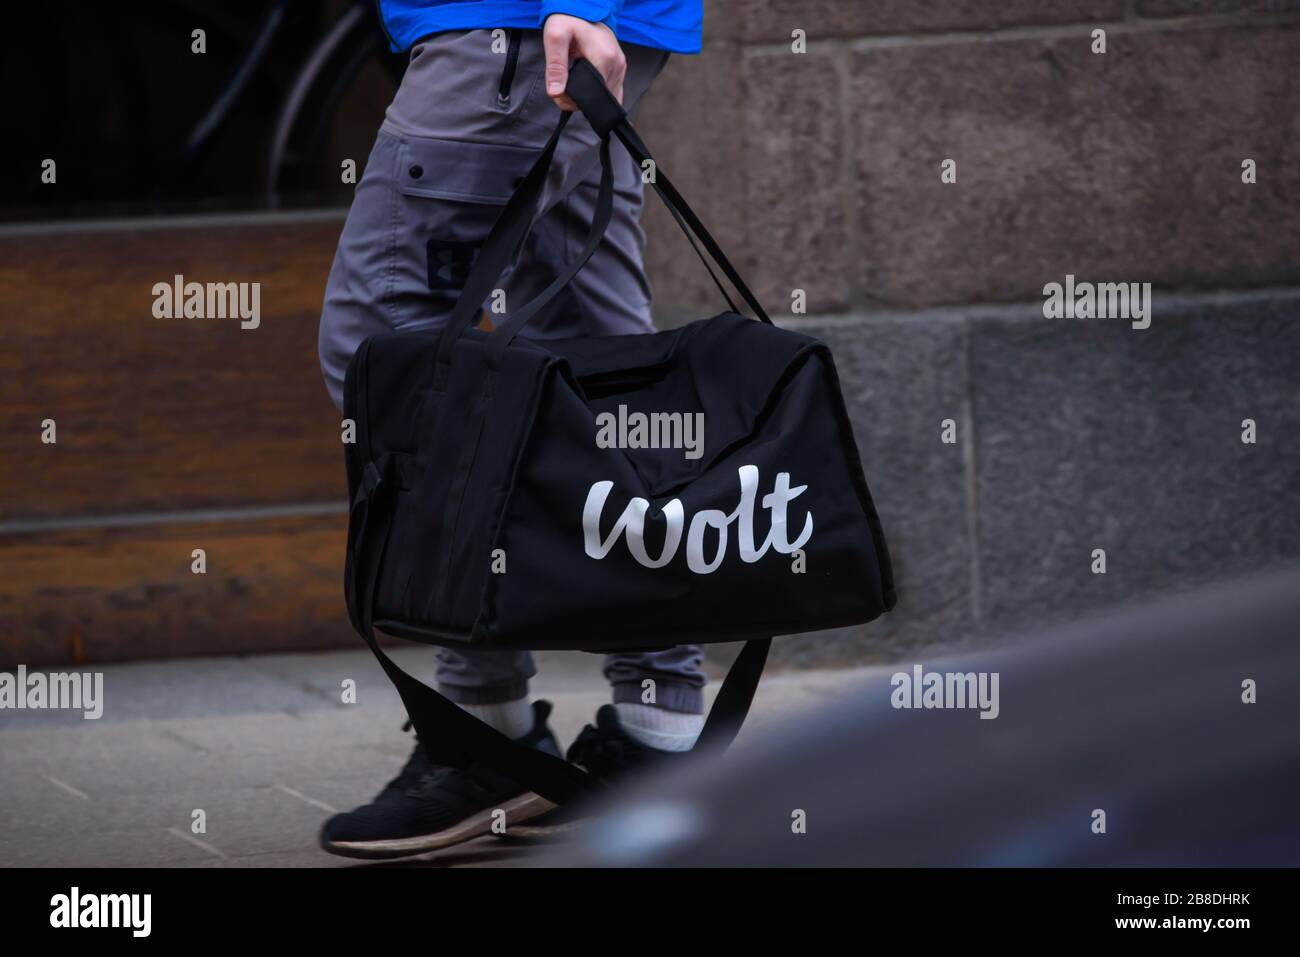 RIGA, LATVIA. 25th November 2019. Wolt company food delivery worker walks with food bag in Riga city. Wolt is Finnish technology company that is known for its food-delivery platform. Stock Photo